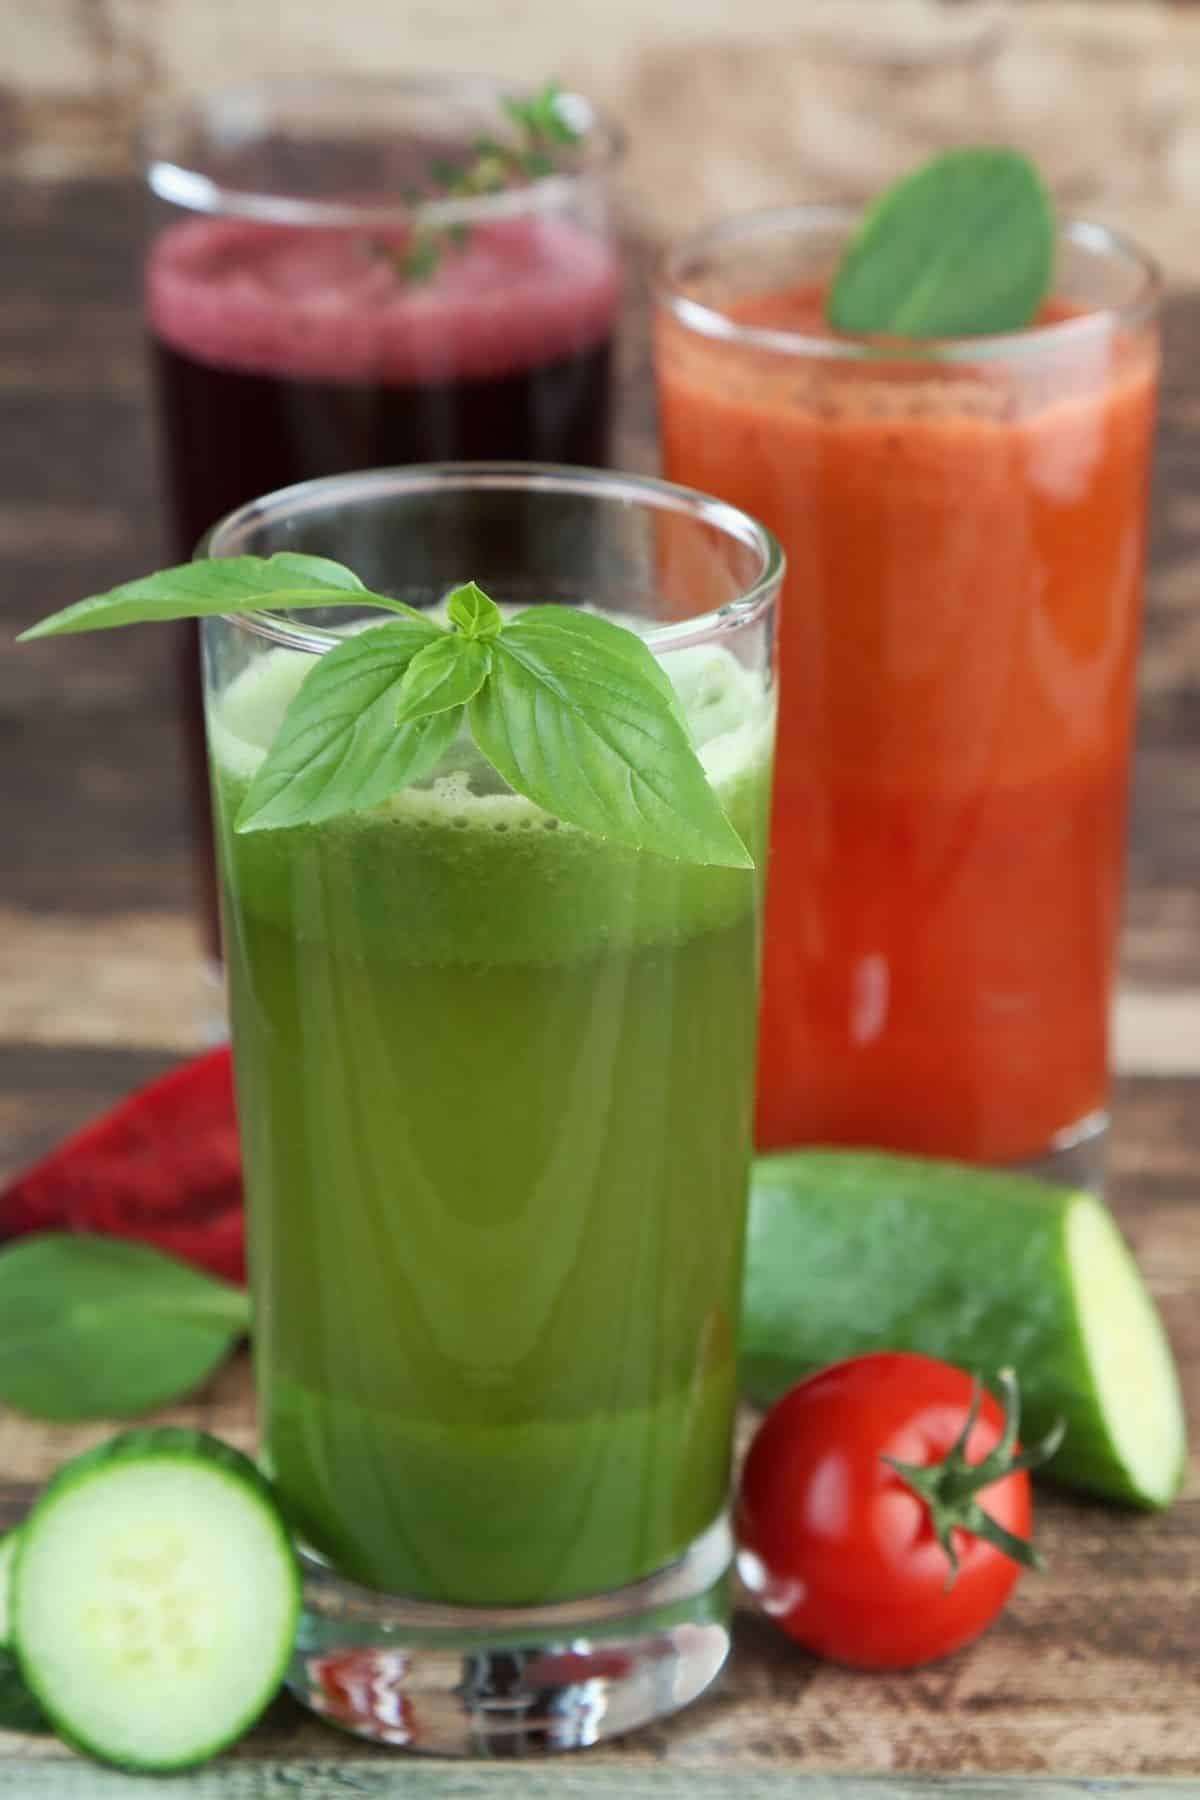 diet juice to lose weight recipes